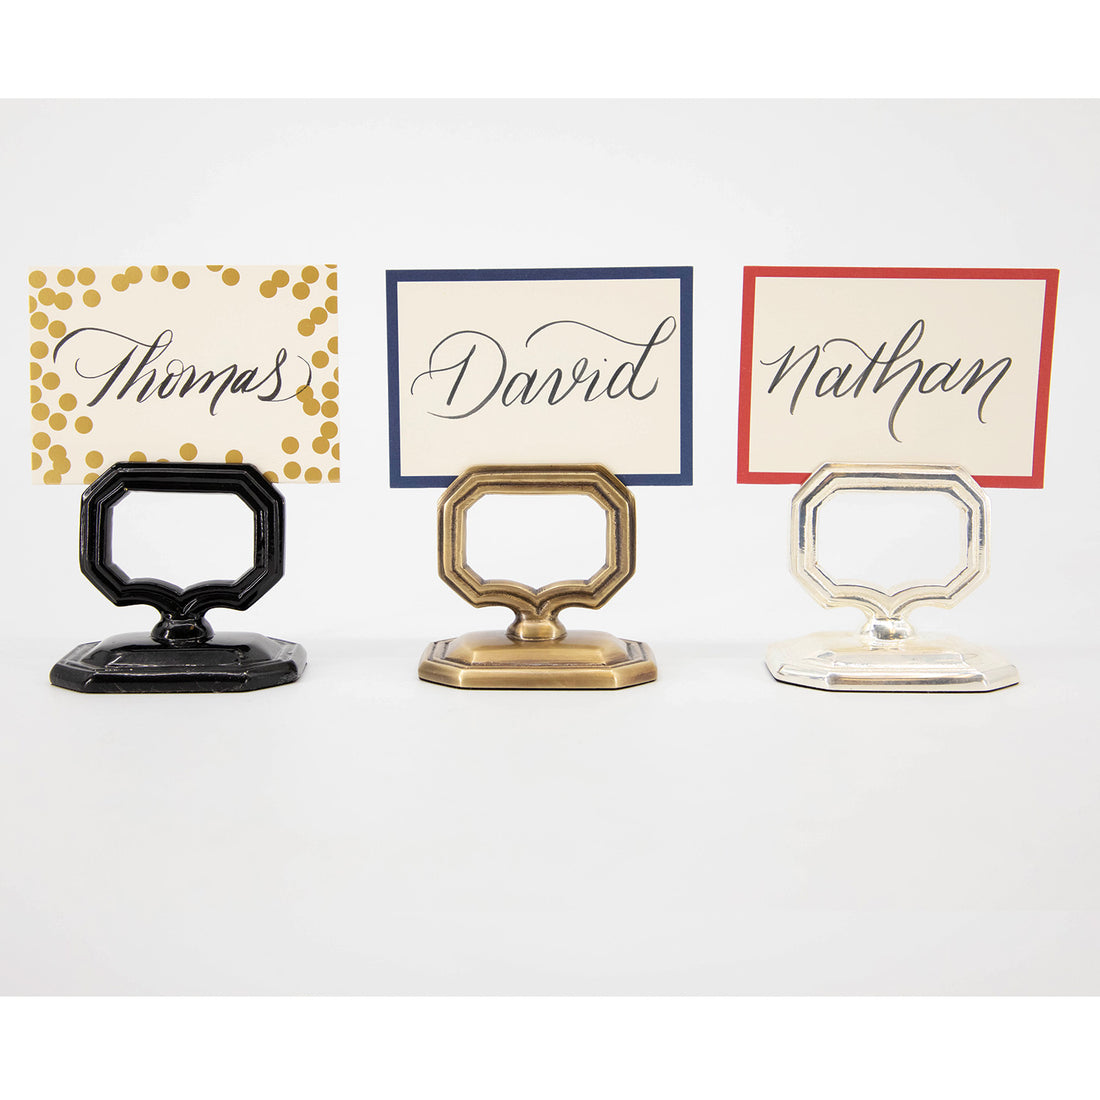 Three Hester &amp; Cook Napkin Rings with Place Card Holders with names on them.